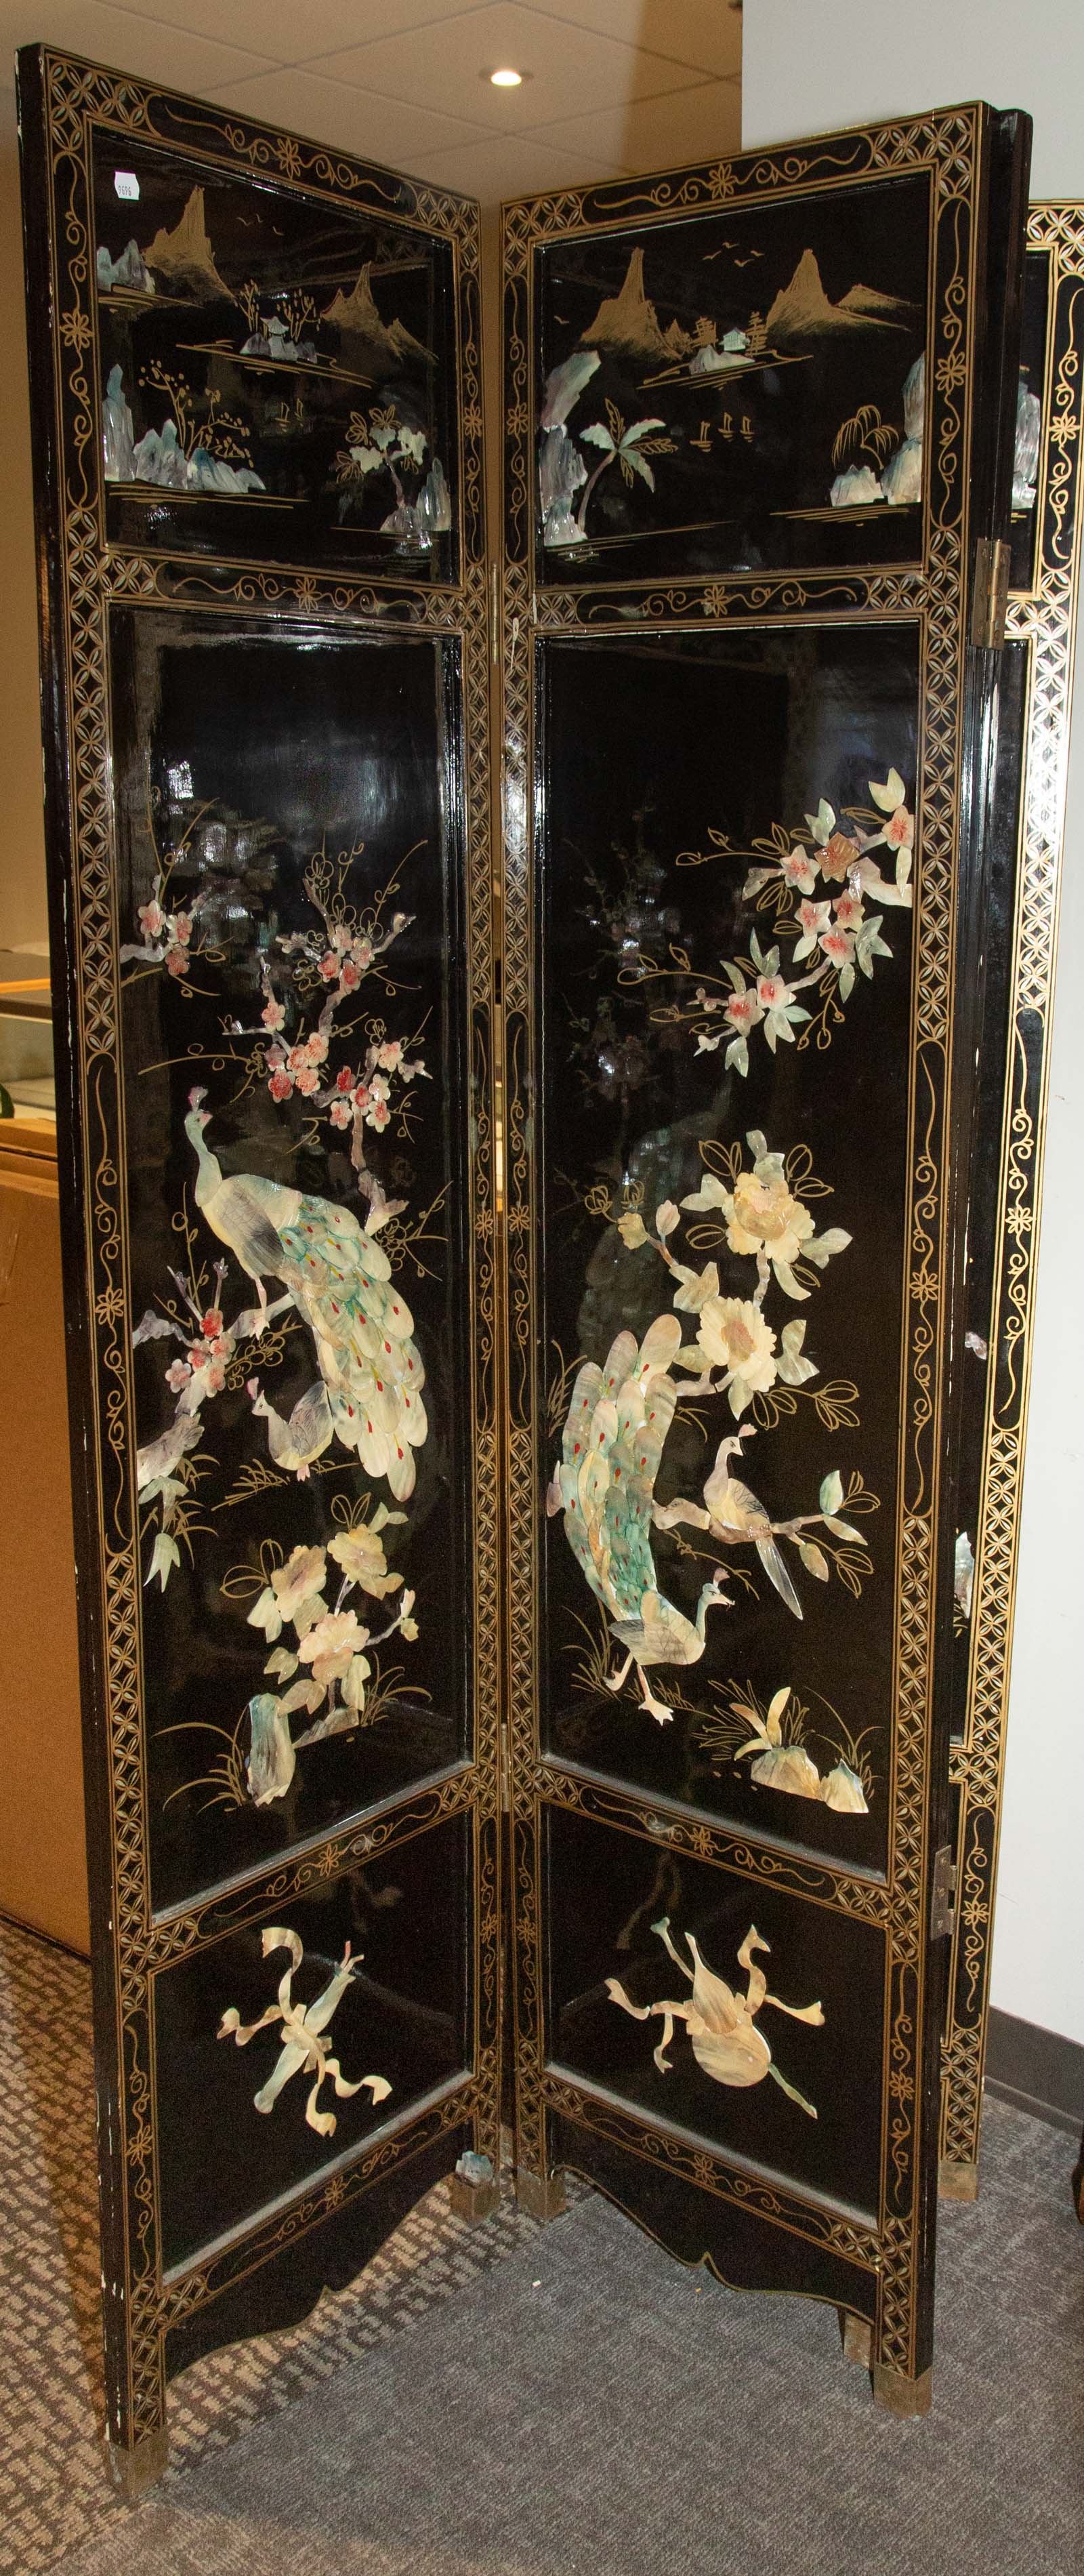 CHINESE FOUR-FOLD ROOM DIVIDER